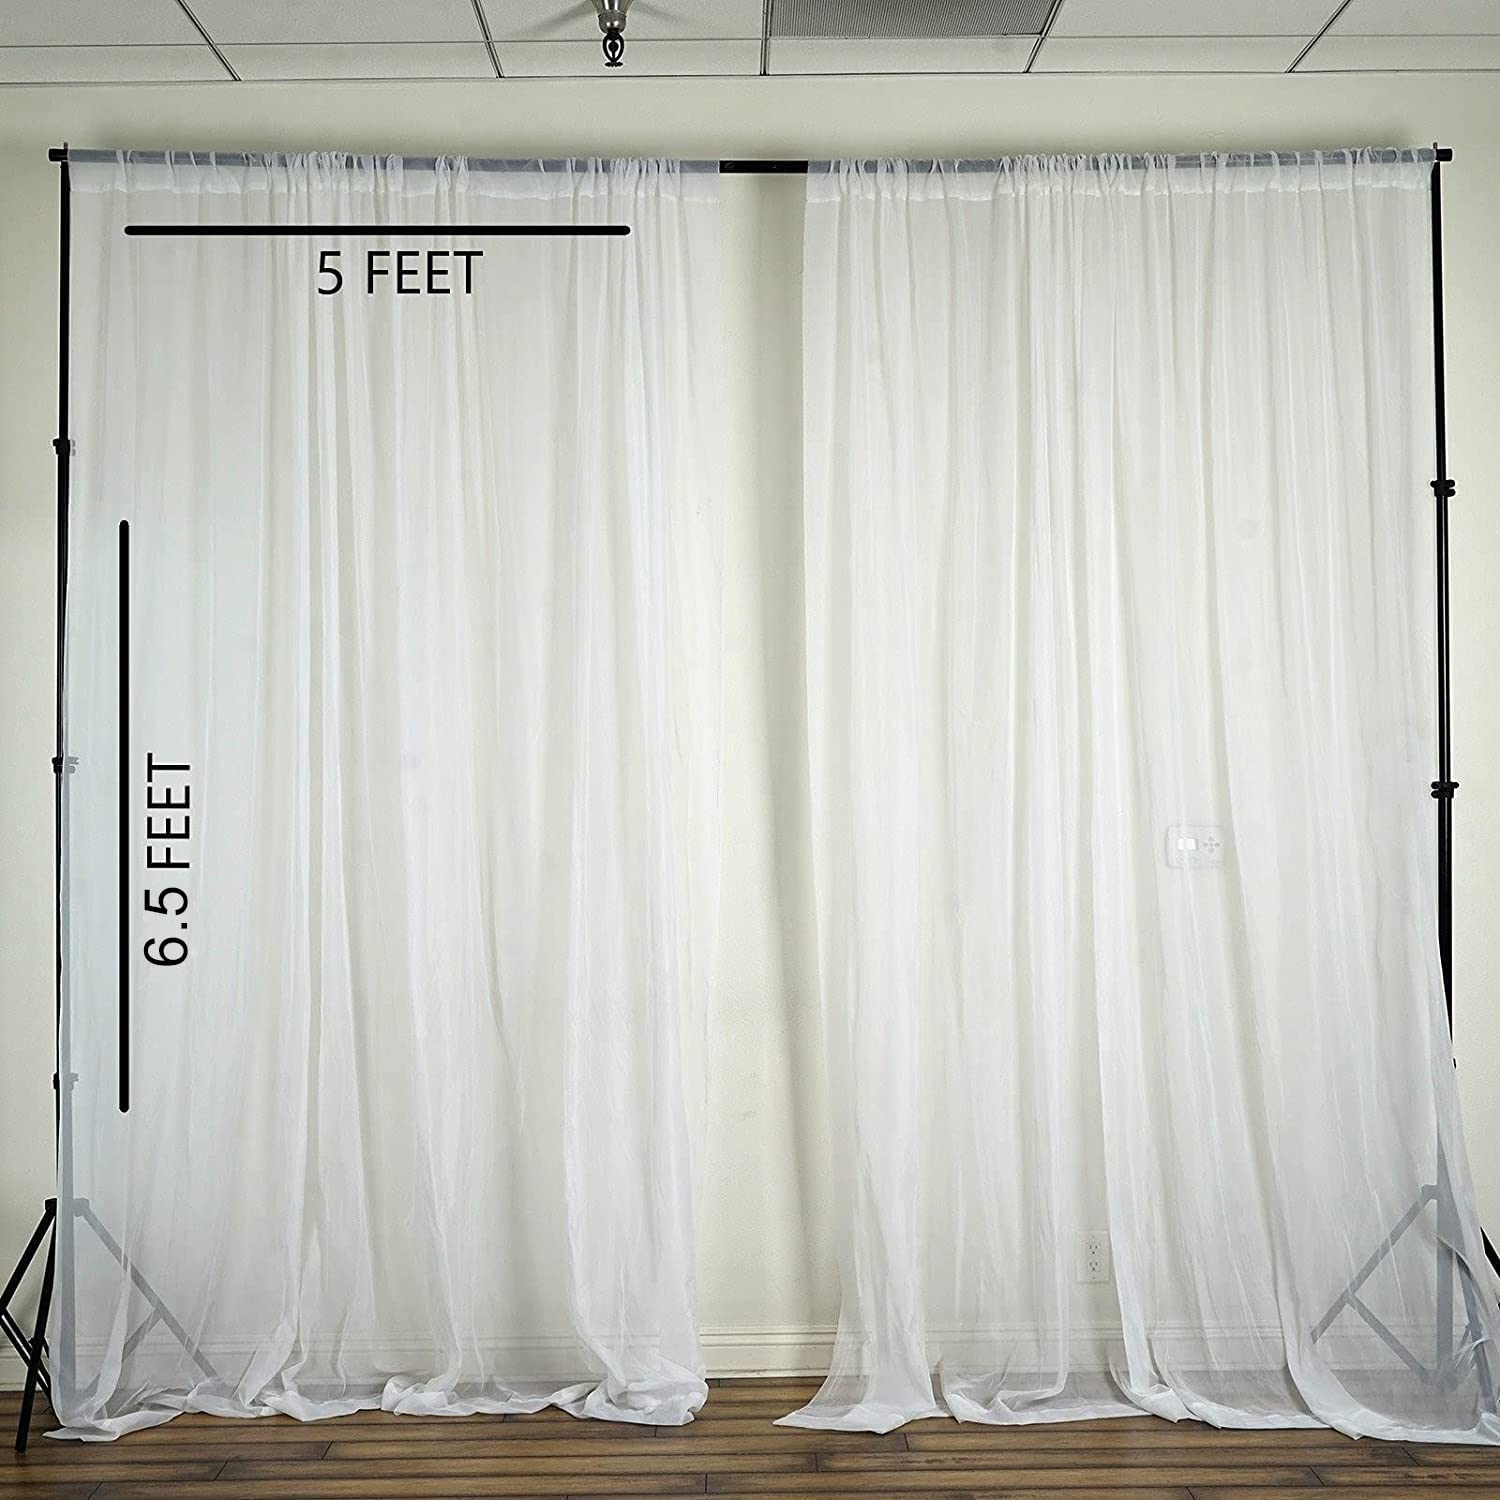 Jazz up your event with our backdrop kit!